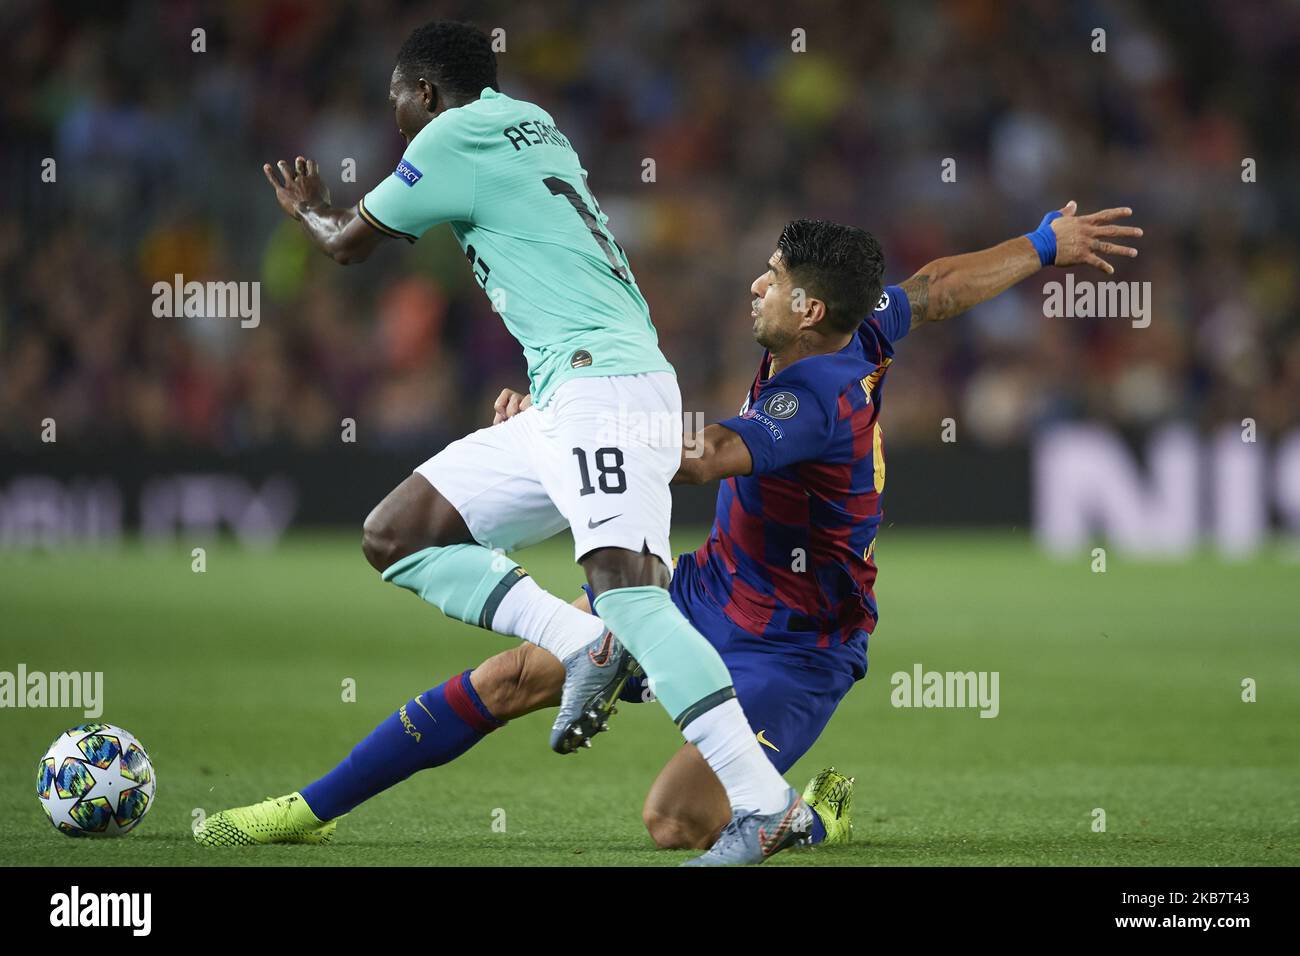 Luis Suarez of Barcelona and Kwadwo Asamoah of Inter of Milan compete for the ball during the UEFA Champions League group F match between FC Barcelona and Inter at Camp Nou on October 2, 2019 in Barcelona, Spain. (Photo by Jose Breton/Pics Action/NurPhoto) Stock Photo